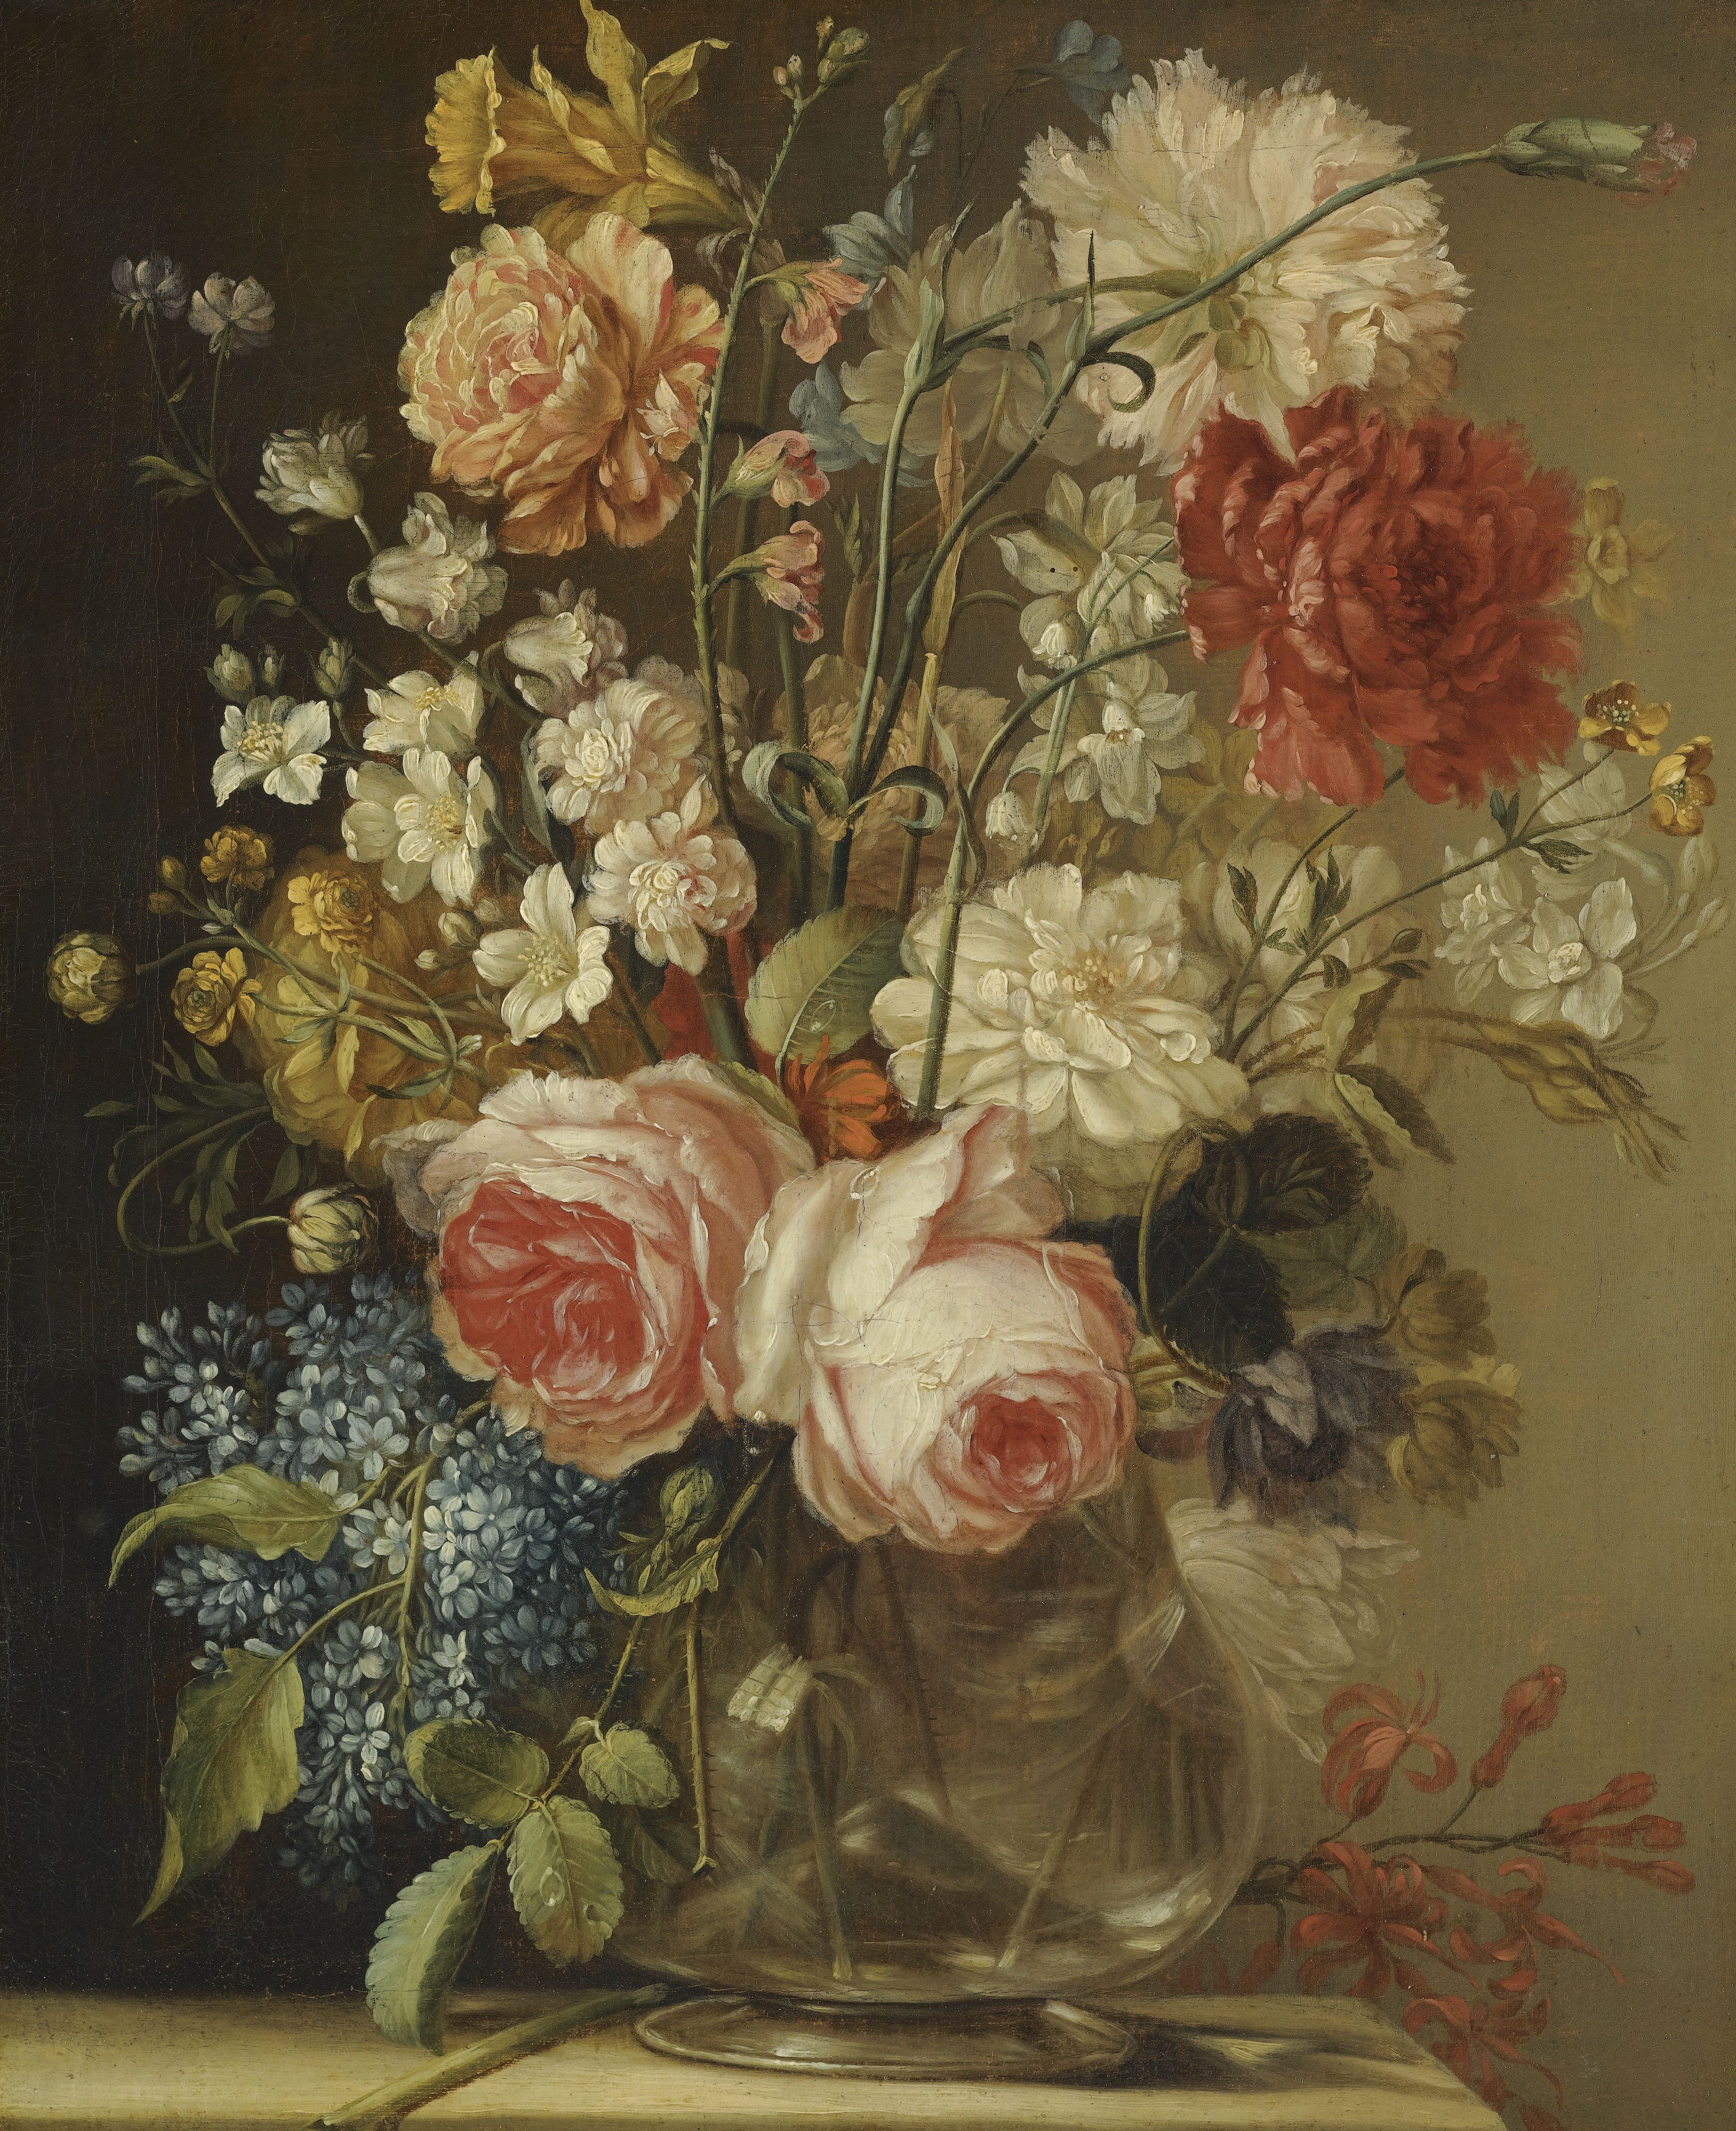 24 Spectacular Vase Of Flowers by De Heem Mural 2024 free download vase of flowers by de heem mural of ludovico stern rome 1709 1777 a still life with roses a daffodil in ludovico stern rome 1709 1777 a still life with roses a daffodil and other flowers in 